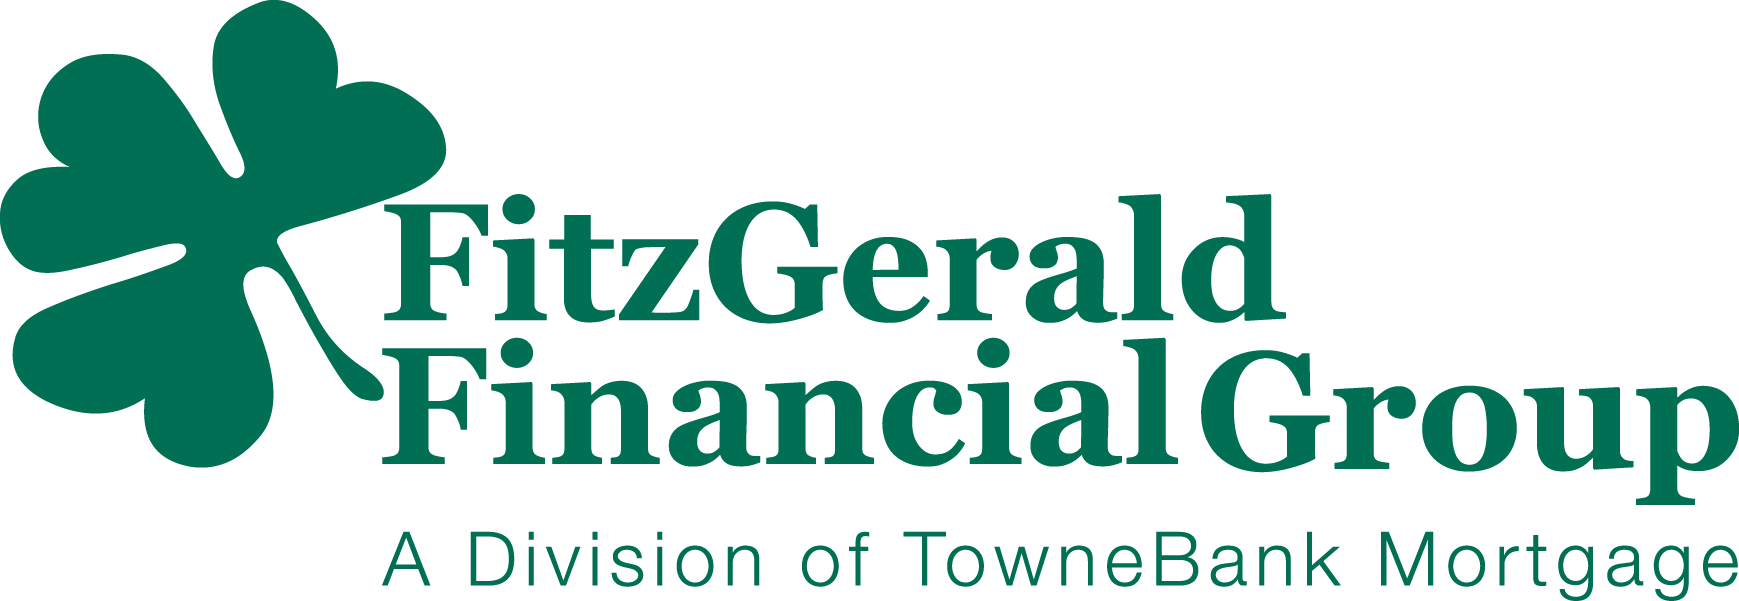 FitzGerald Financial Group